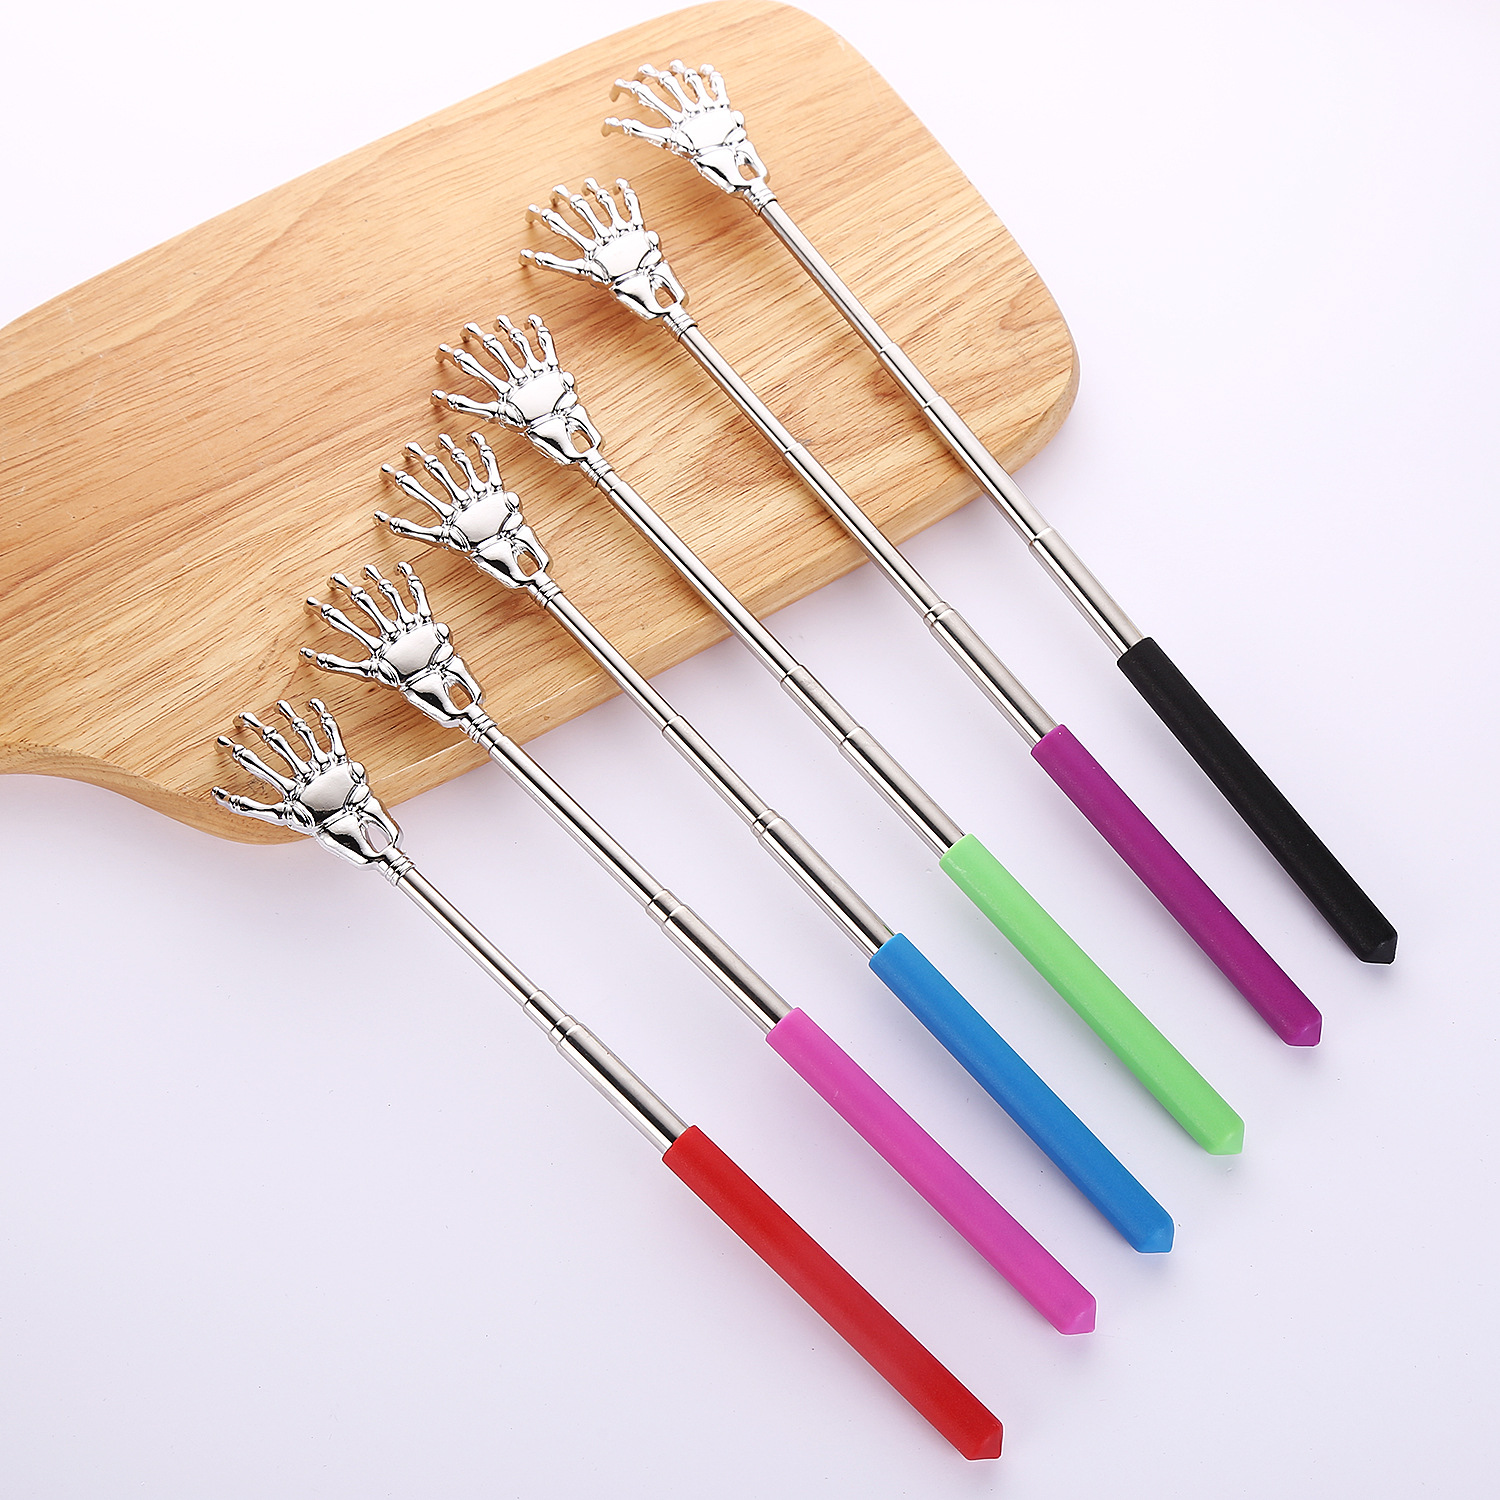 Ghost Hand Stainless Steel Telescopic Back Scratcher Massager Don't Ask for Old Men Stainless Steel Back Scratcher Scratching Device